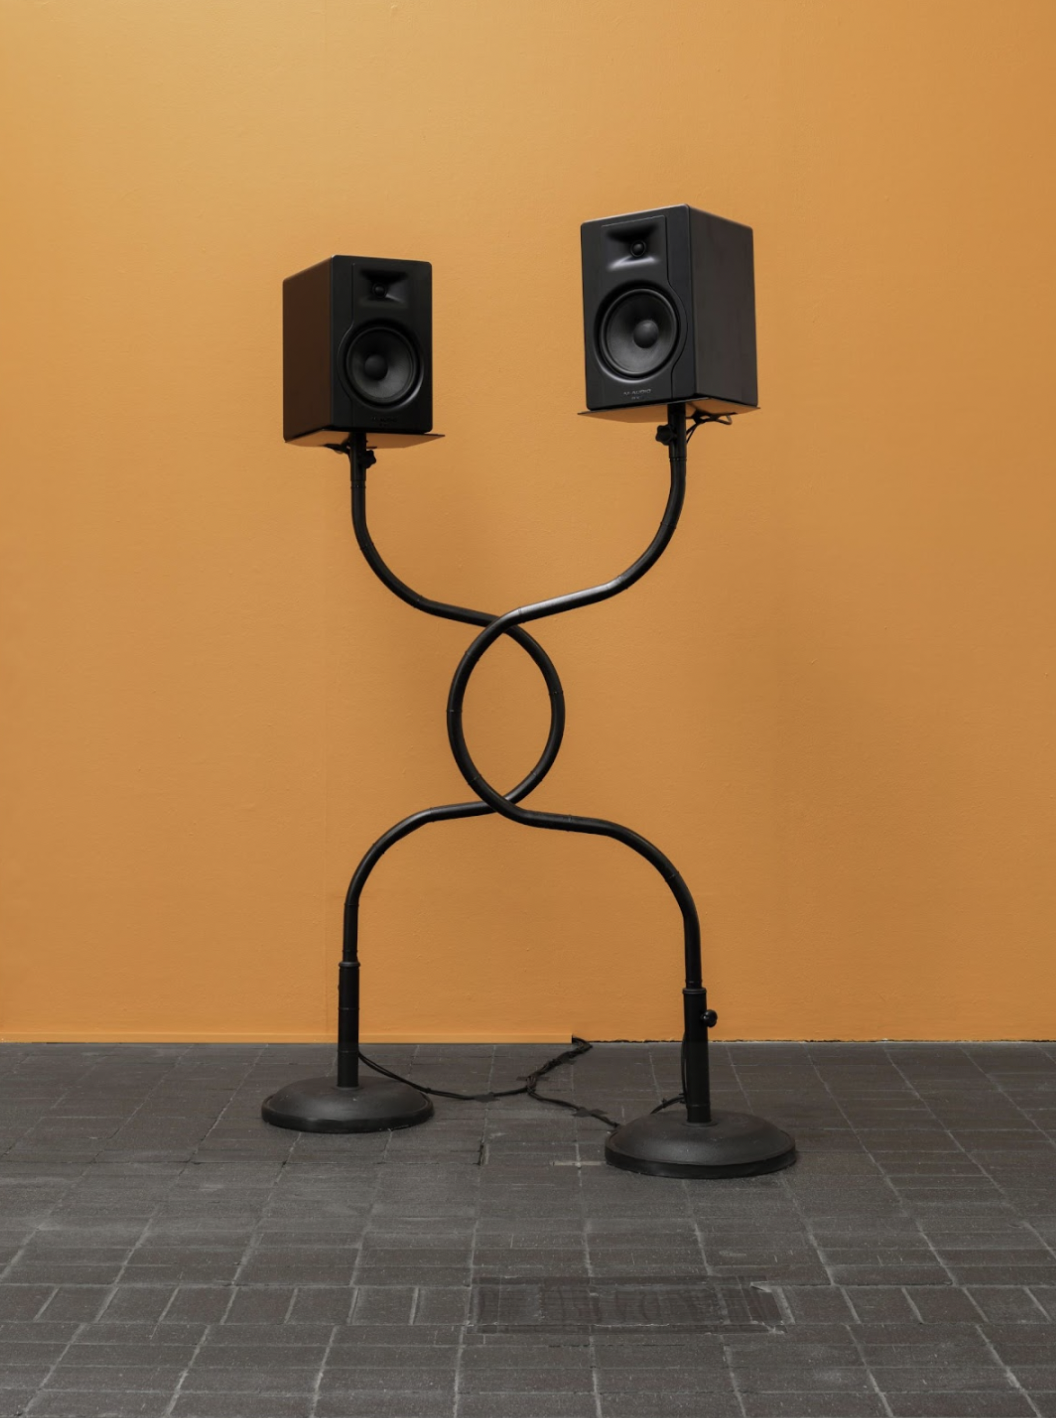 Two speakers with intertwined stands